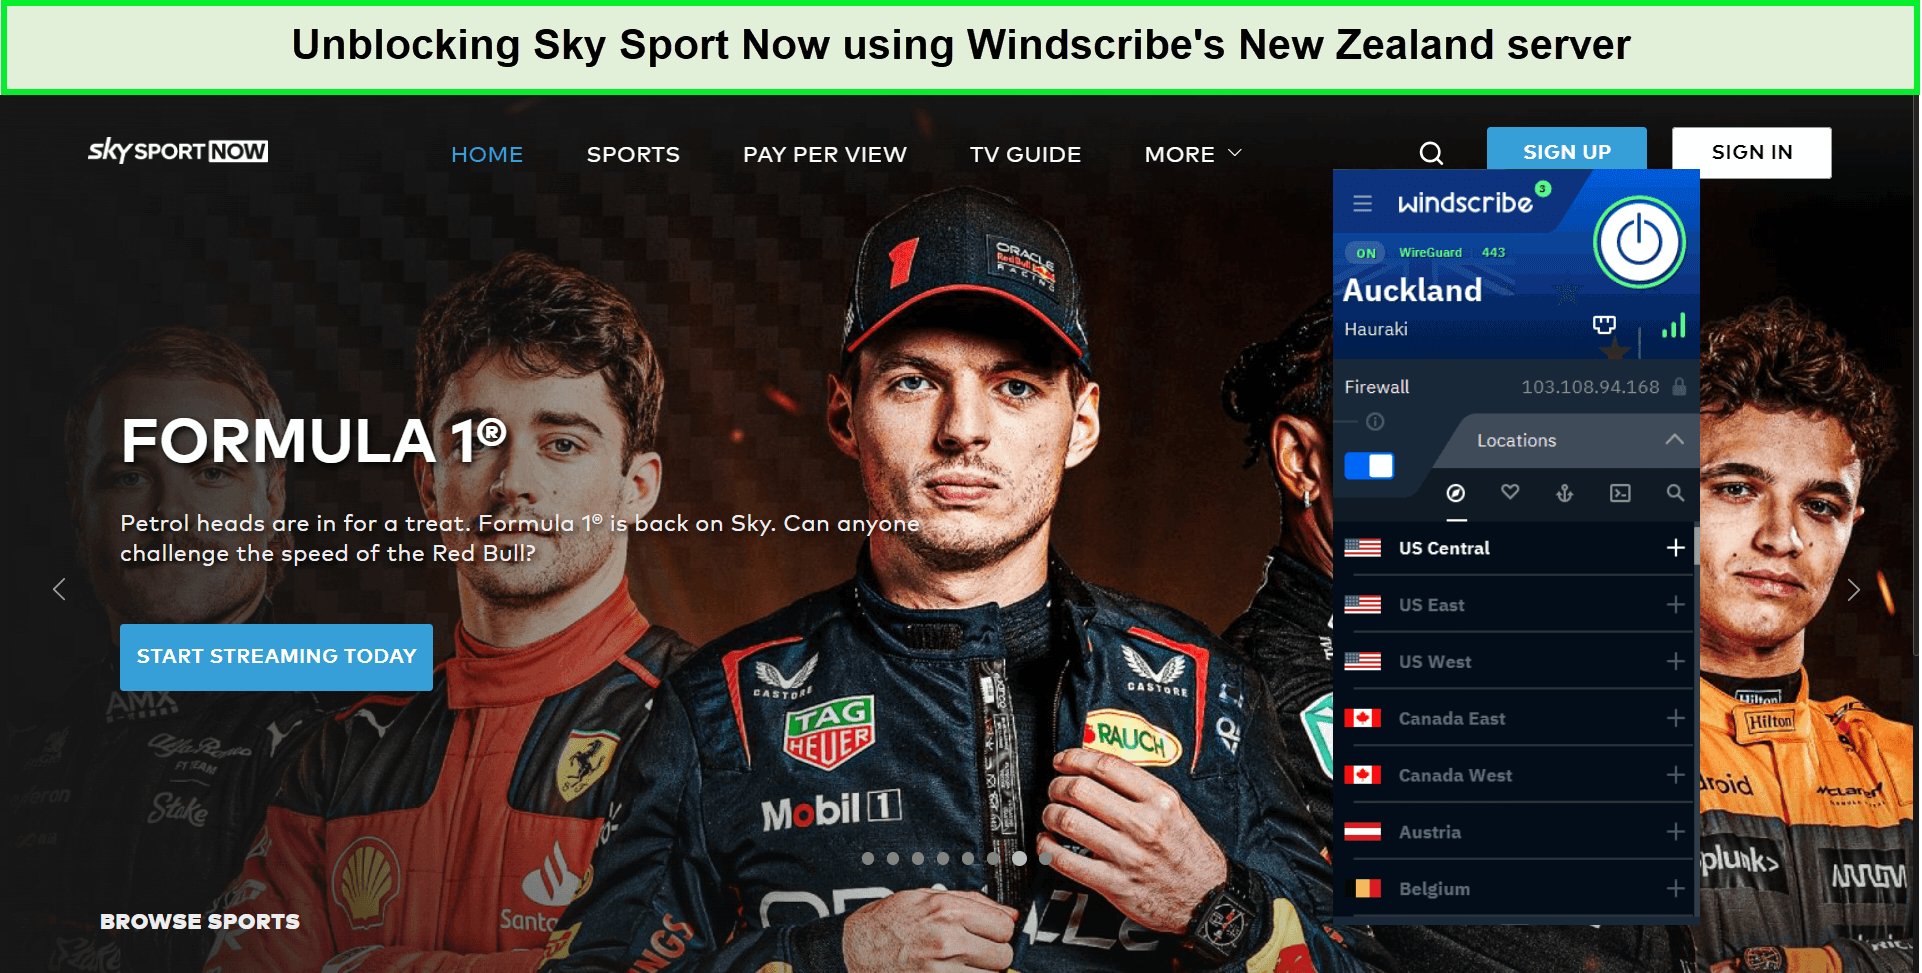 sky-sport-now-in-Singapore-unblocked-by-windscribe